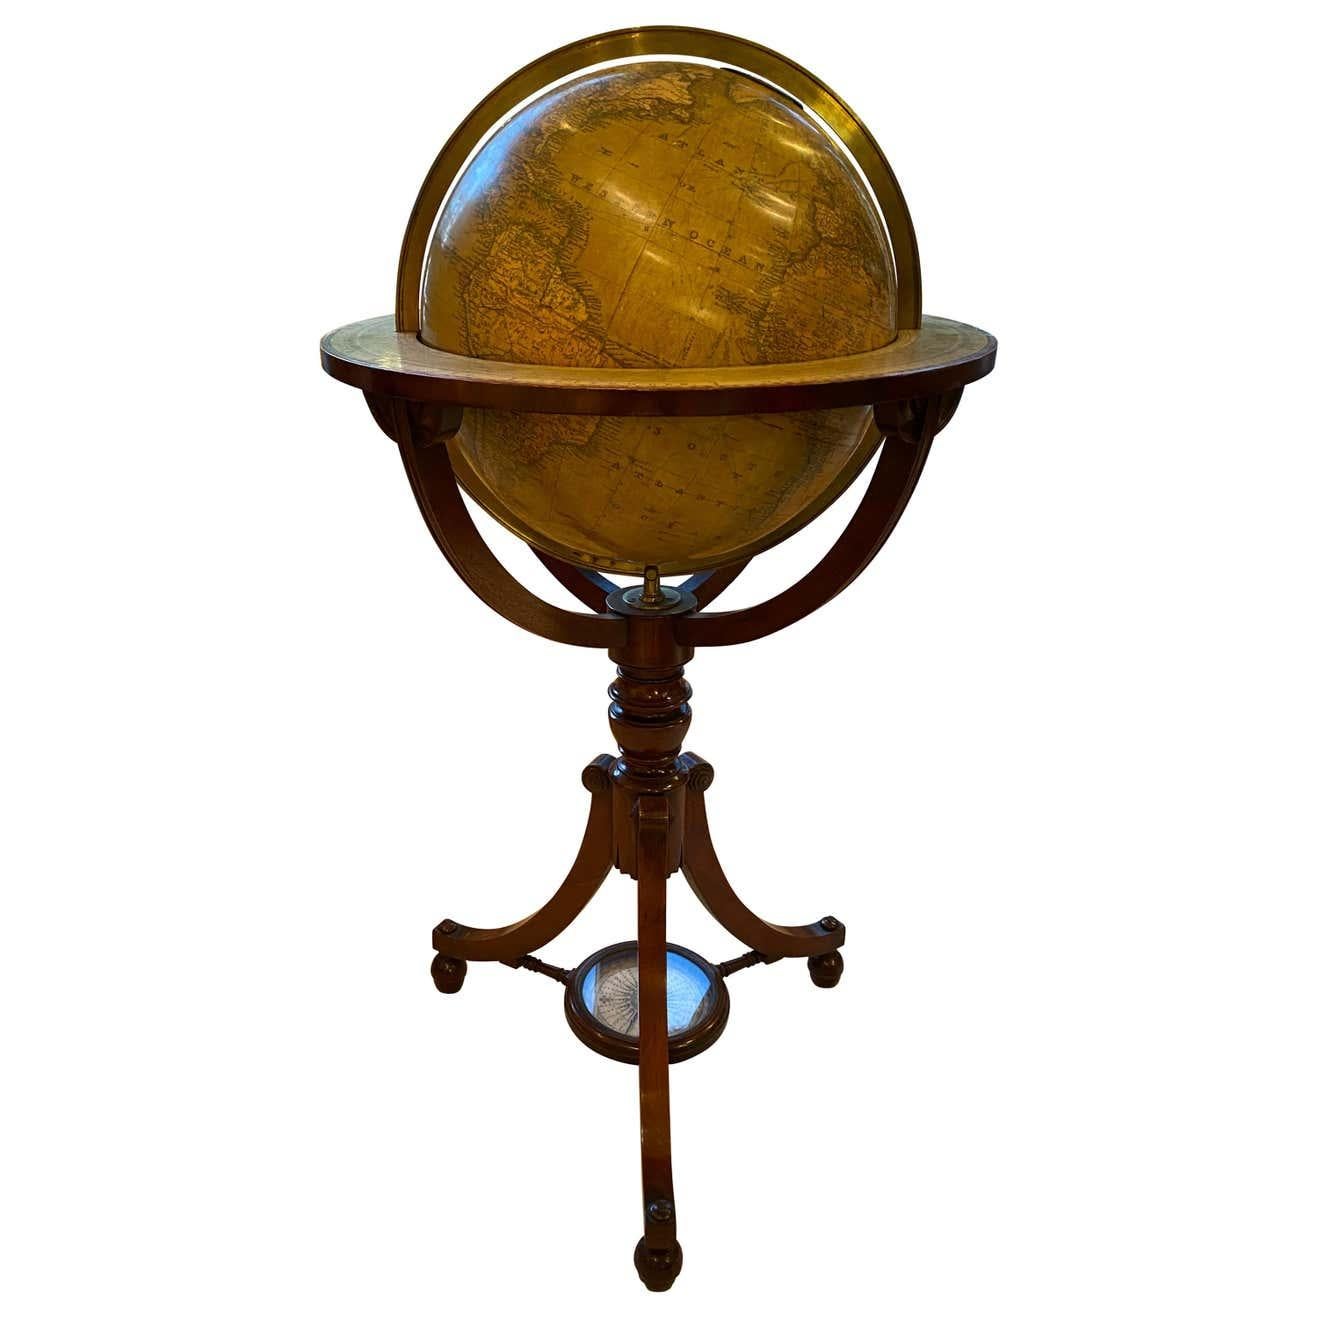 An extremely rare and important 21 inch English globe by renowned cartographers John Newton and Son, one of the most important globe makers of early 19th century England. Representing the terrestrial landscapes, this sphere rests in its gorgeous